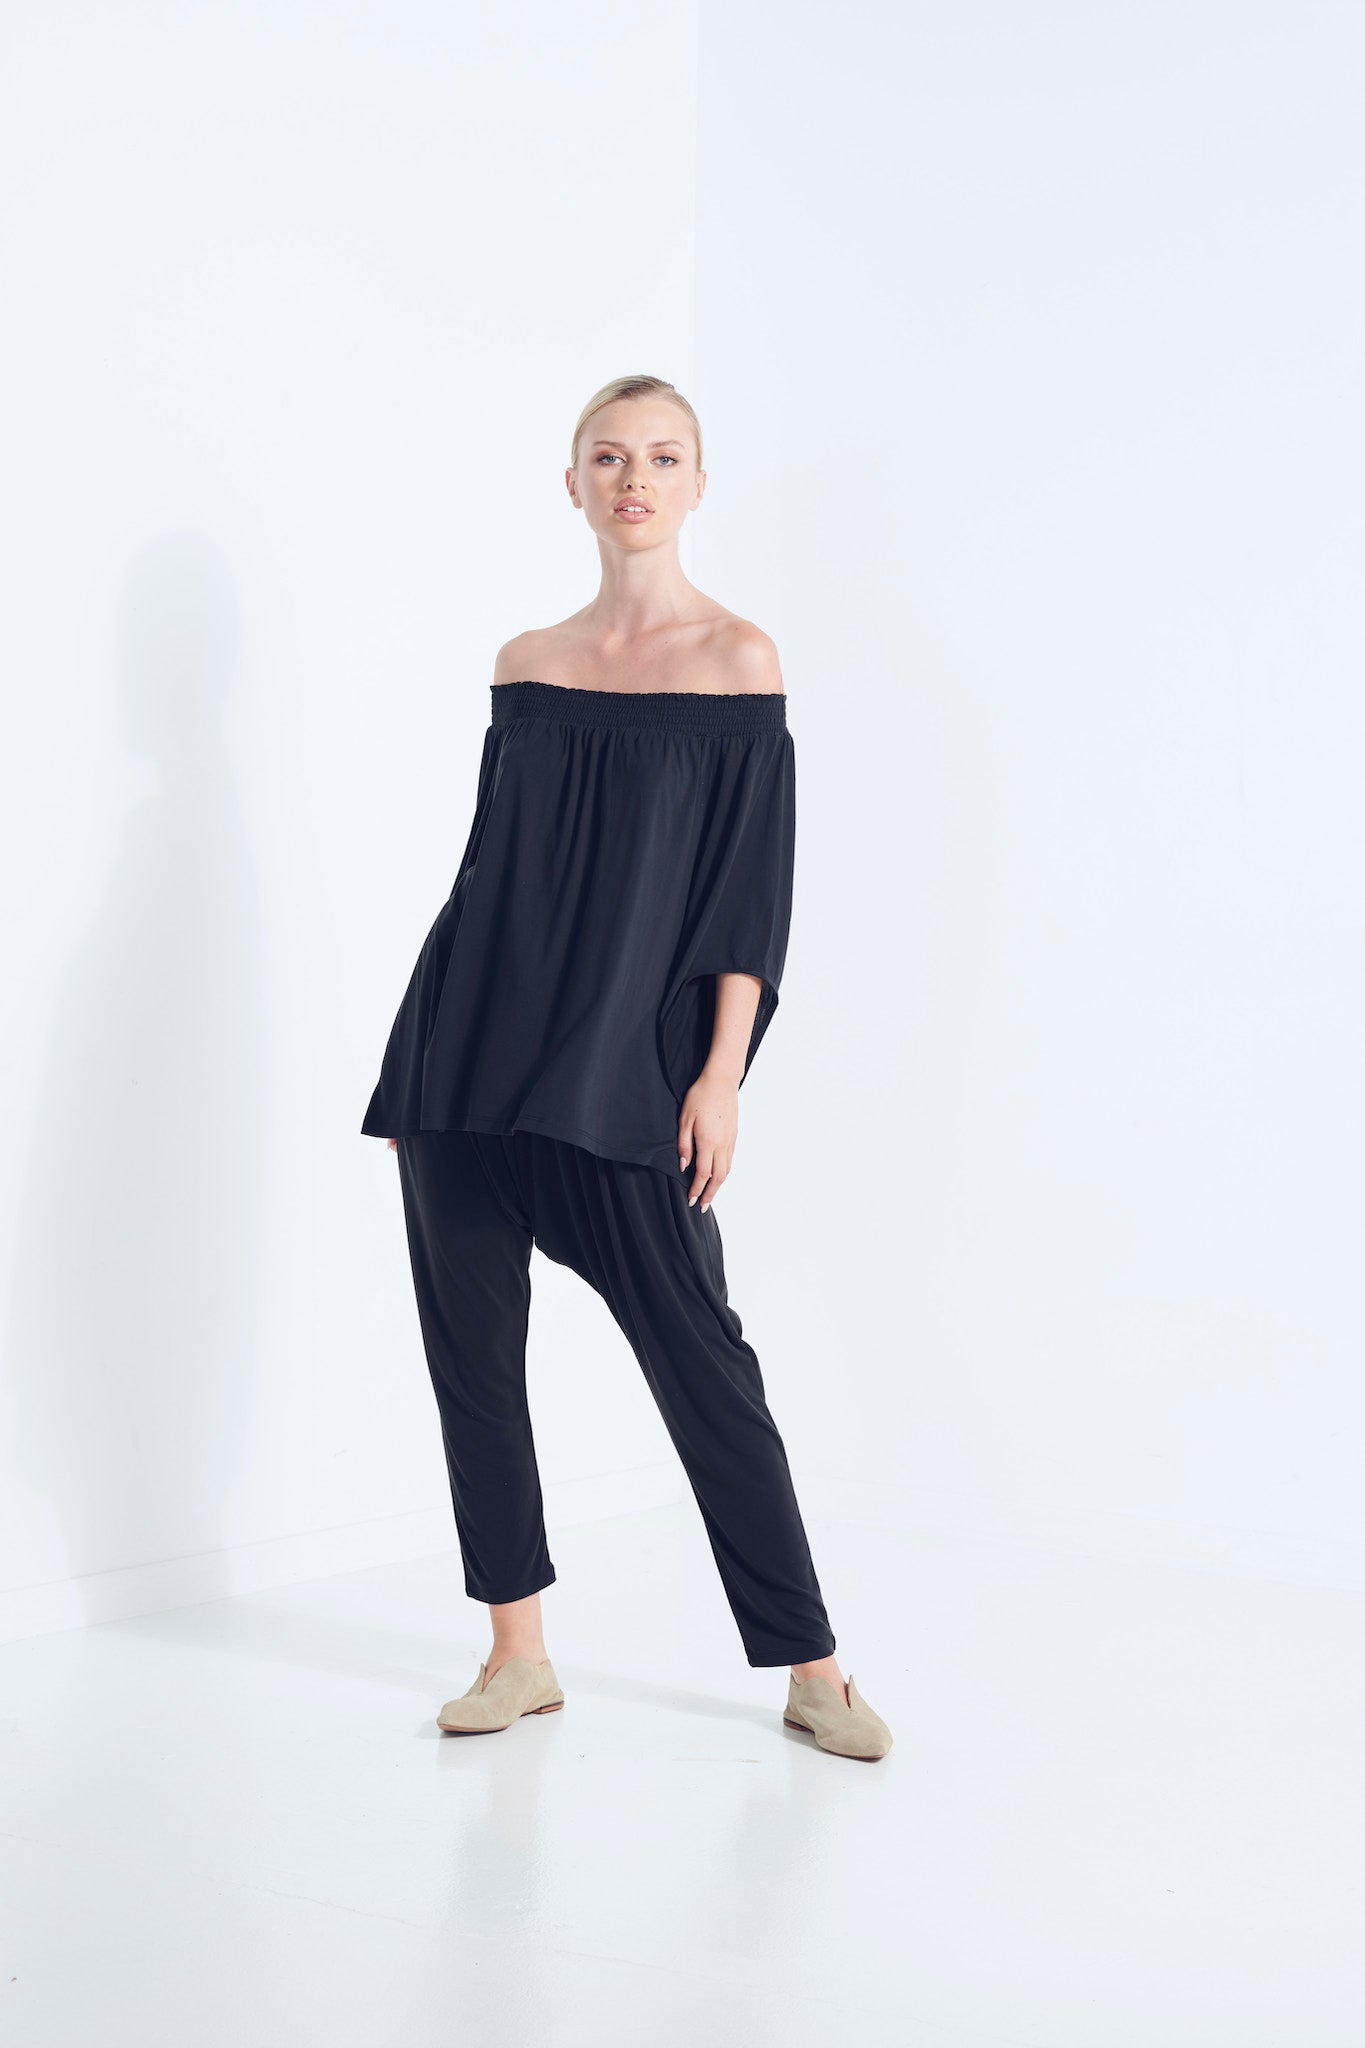 NAEVIA OFF SHOULDER TOP KNIT BEECHWOOD MODAL ELASTIC TOP WITH BELL SLEEVE DARK WASHED BLACK MOVEMENT VIEW